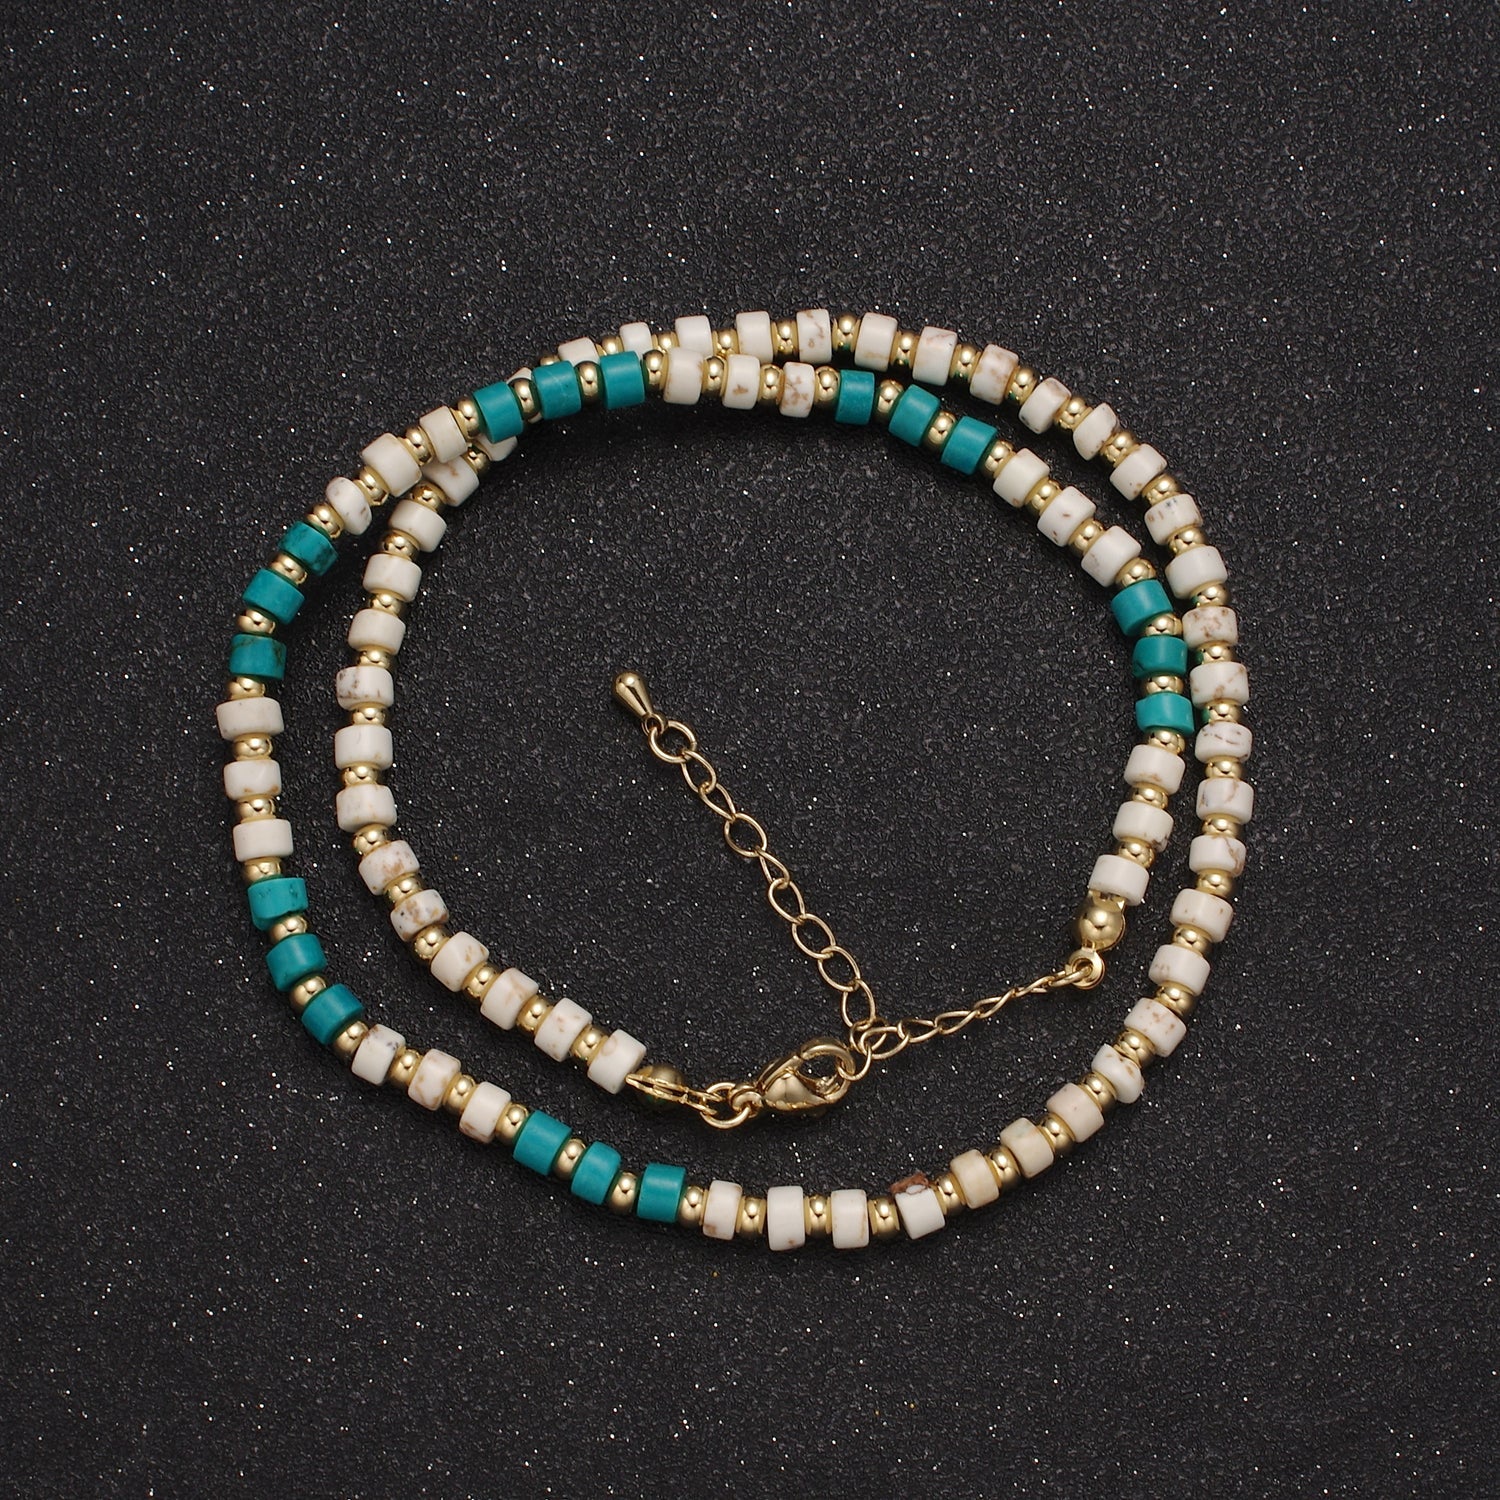 Genuine Natural Turquoise Beaded Necklace With Wooden Opal Beads Gemstone Necklace, Simple Classic Boho Layer Necklace WA-588 - DLUXCA